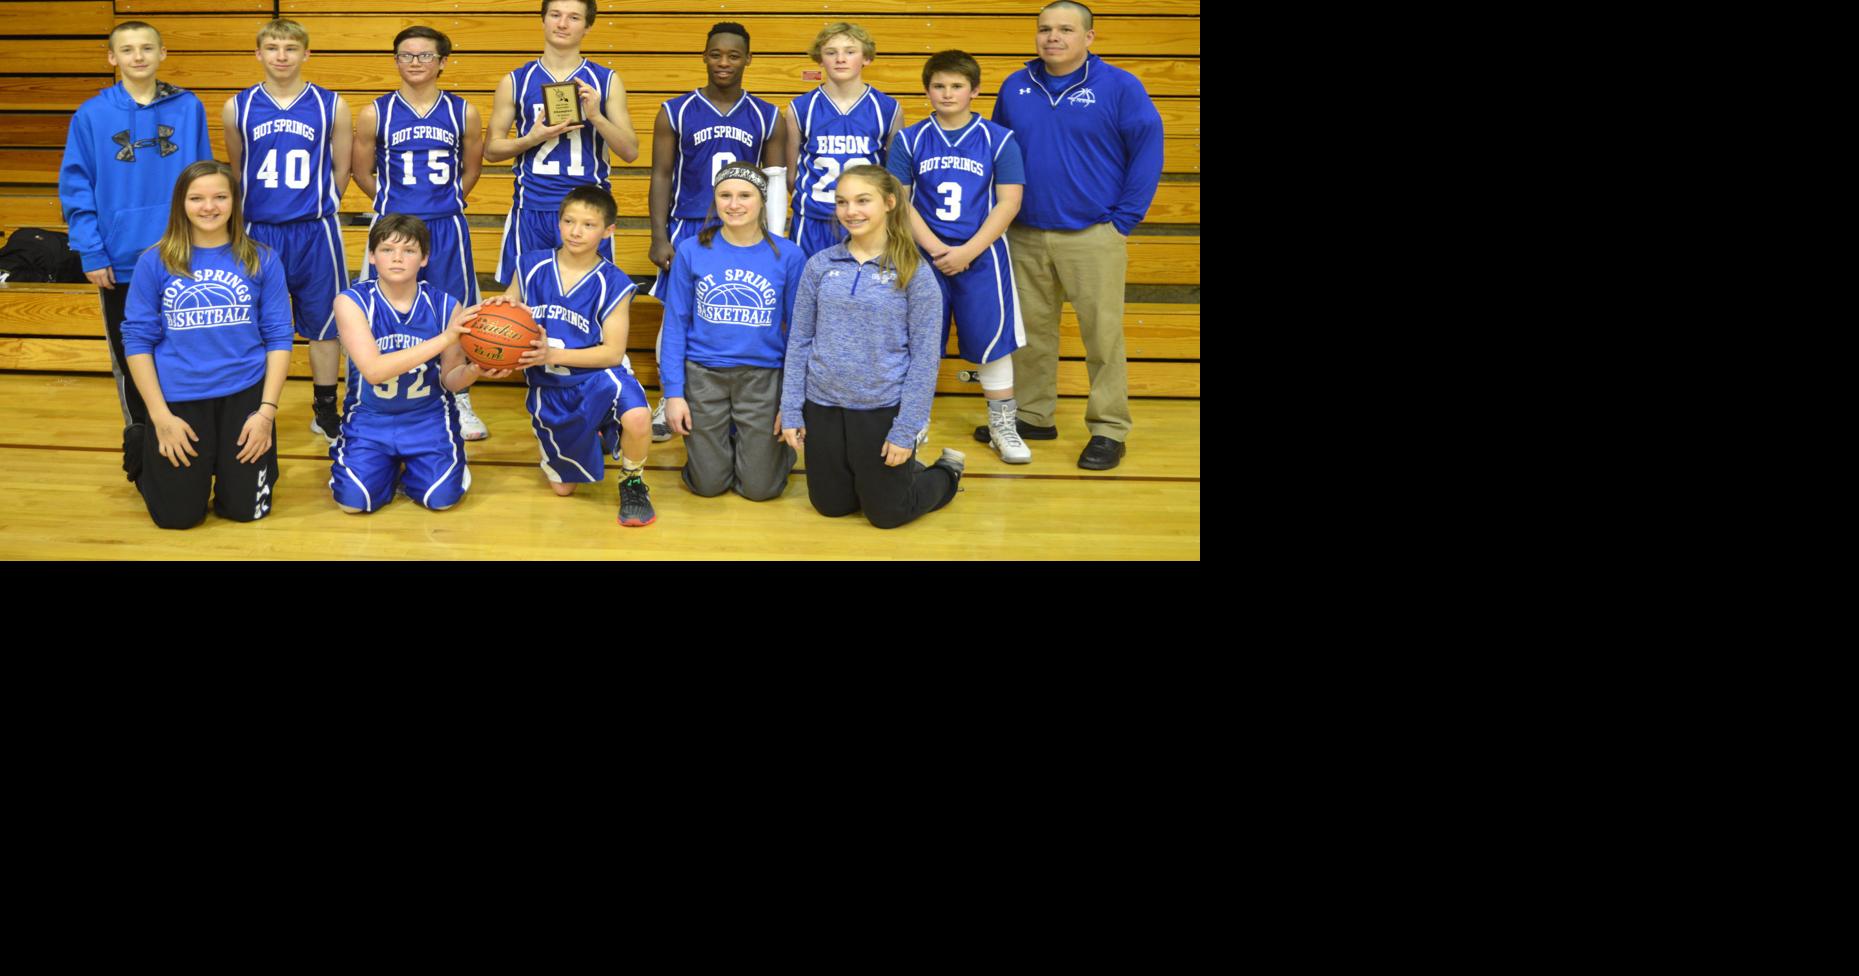 Bison middle school boys’ basketball teams win Cartwright Tournament